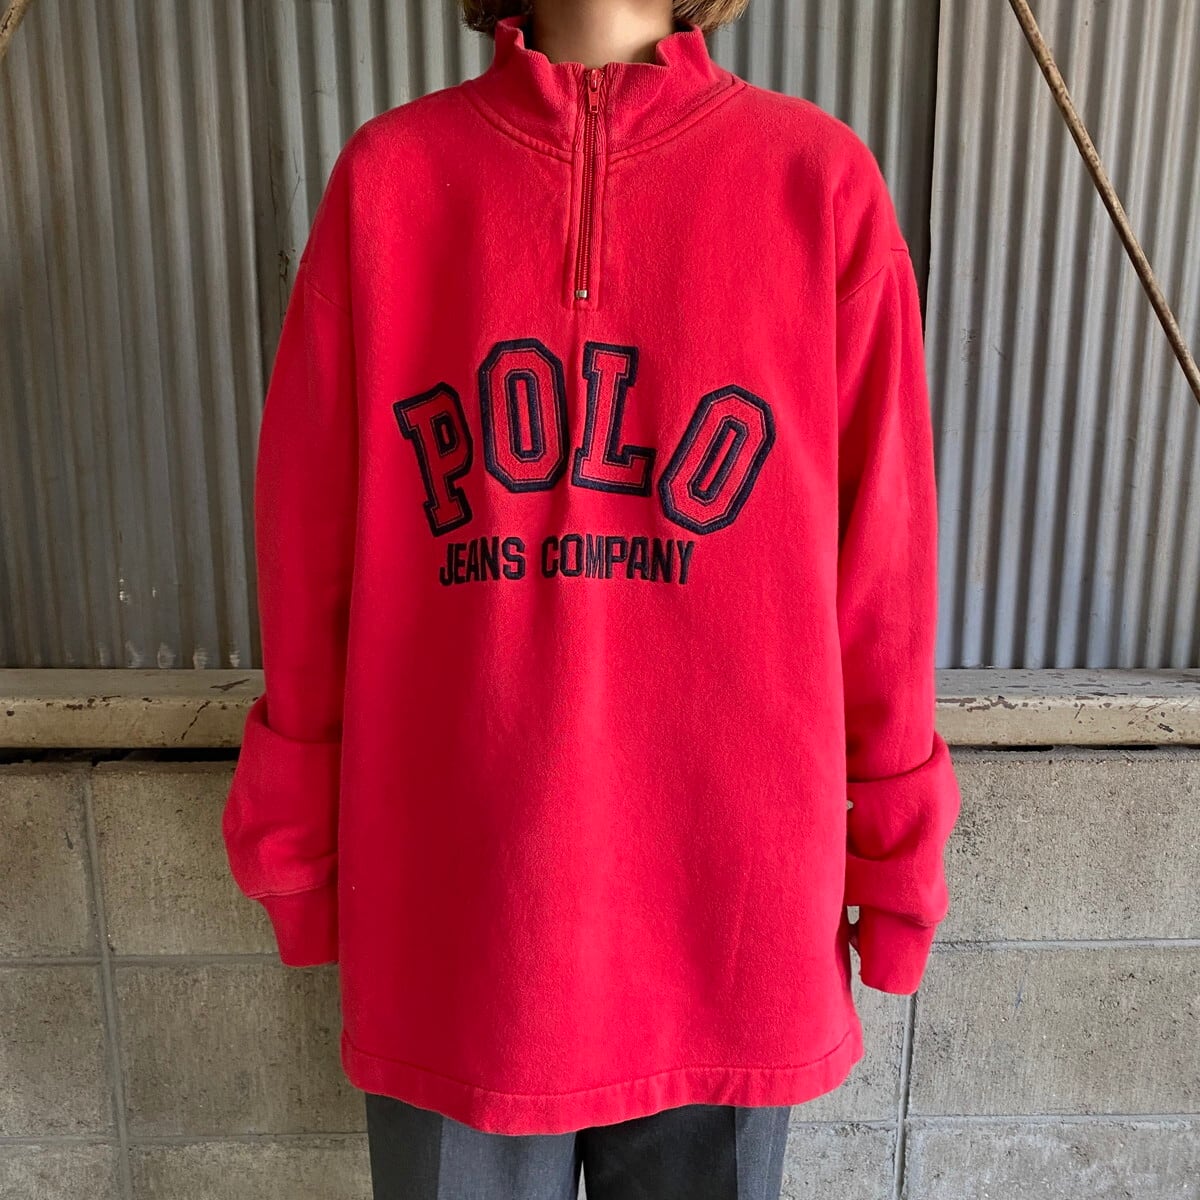 RL POLO JEANS CO.(ポロジーンズ) メンズ トップス